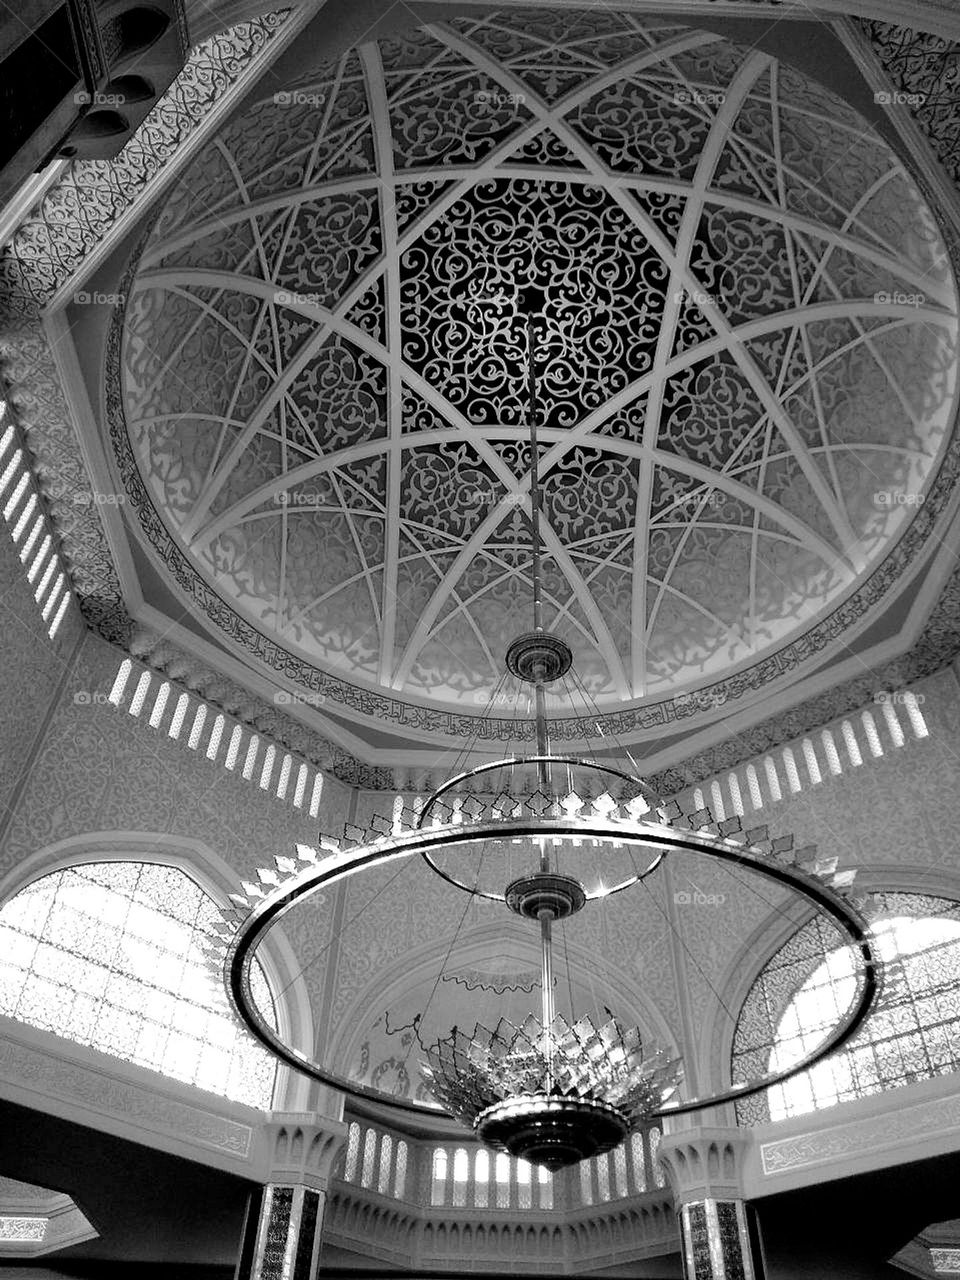 dome ceiling
in the mosque.